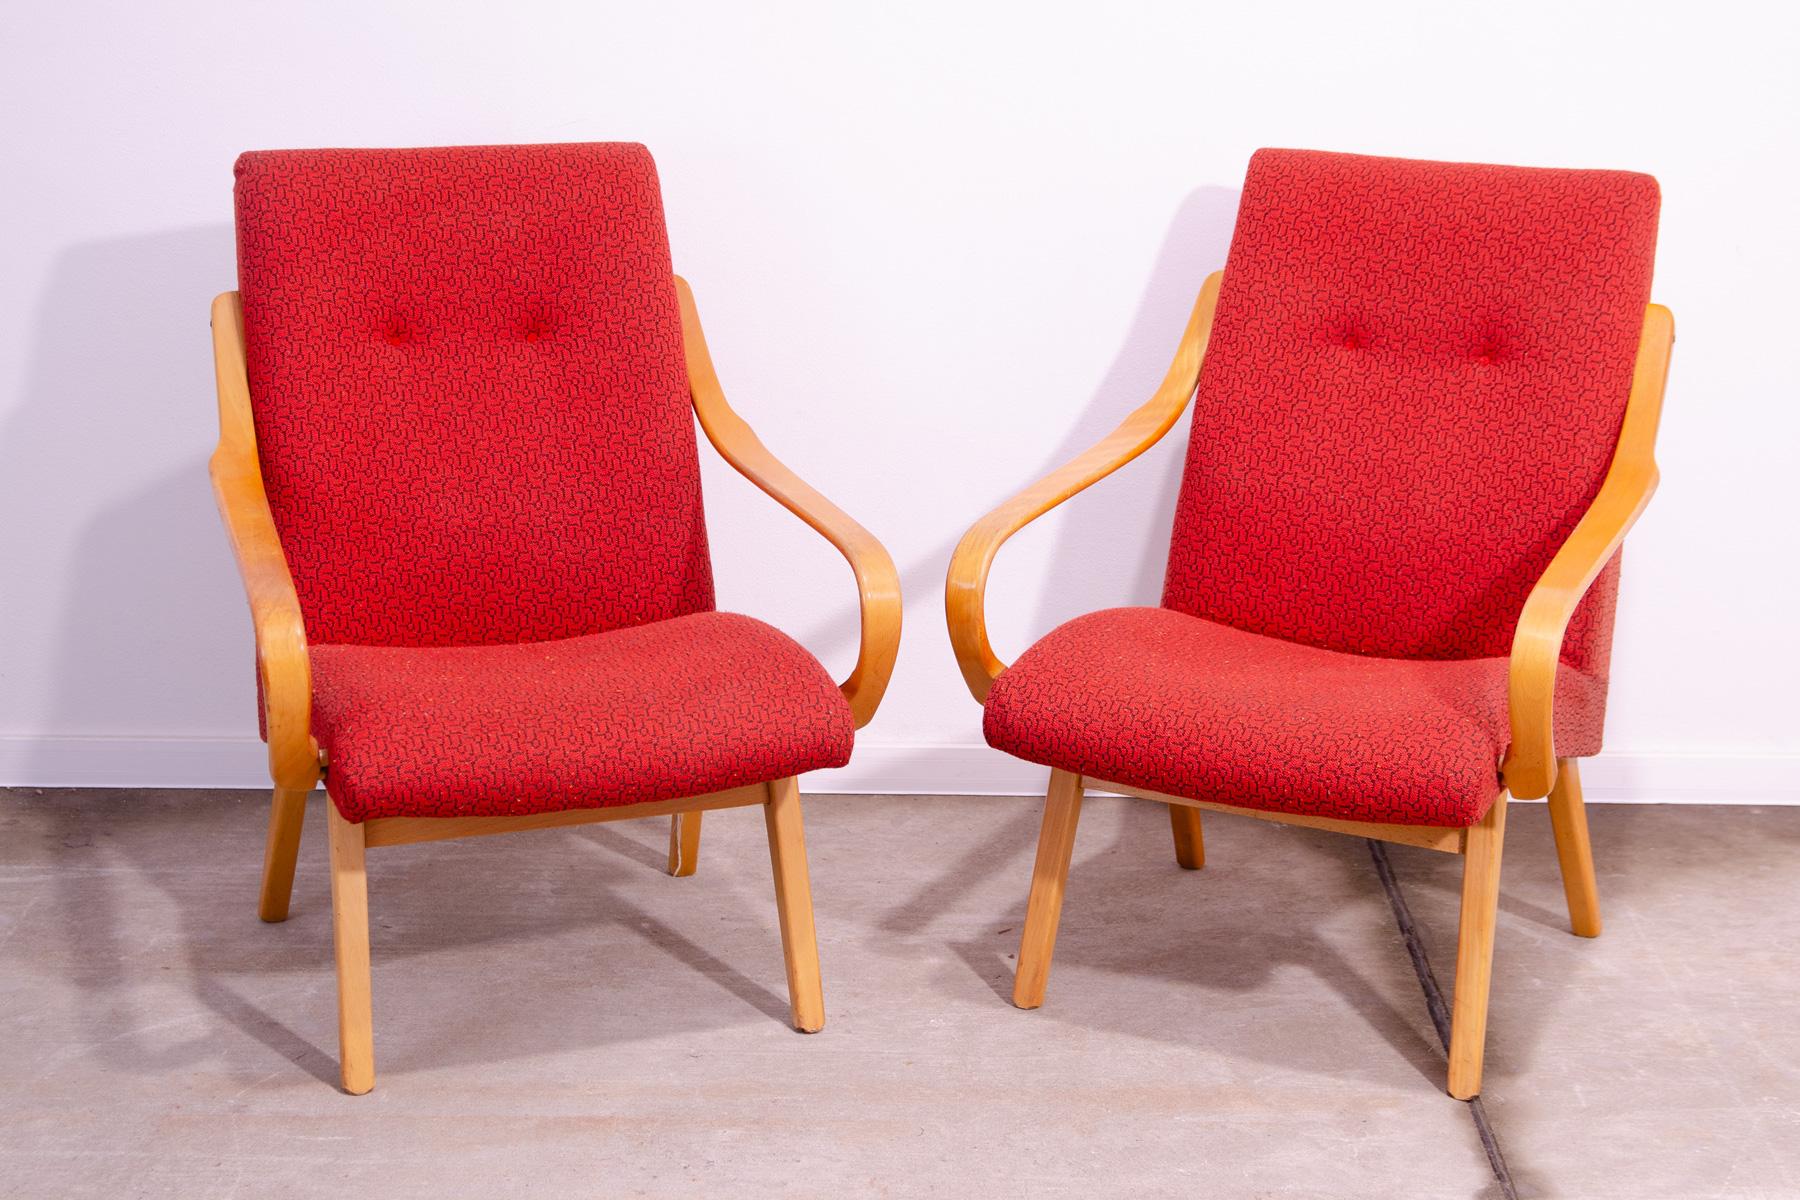 These bentwood armchairs were designed by Jaroslav Šmídek and made by JITONA company in the former Czechoslovakia in the 1960´s.

The chairs are stable and comfortable. These are in good Vintage condition, shows slight signs of age and using.

Price